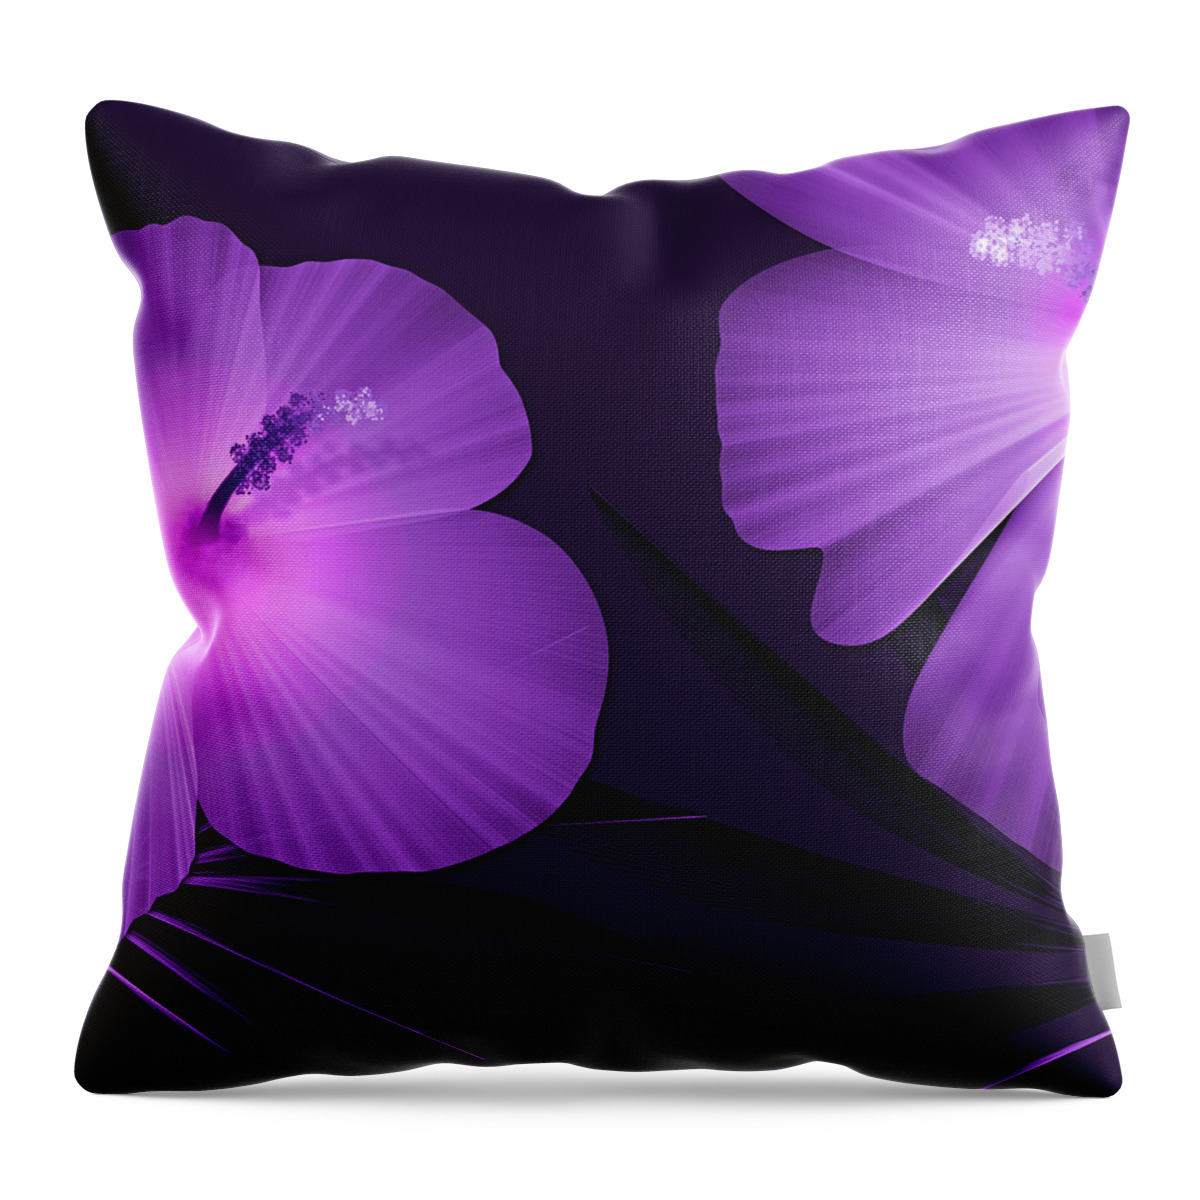 Tropical Print Throw Pillow featuring the digital art Ultraviolet Hibiscus Tropical Nature Print by Sand And Chi